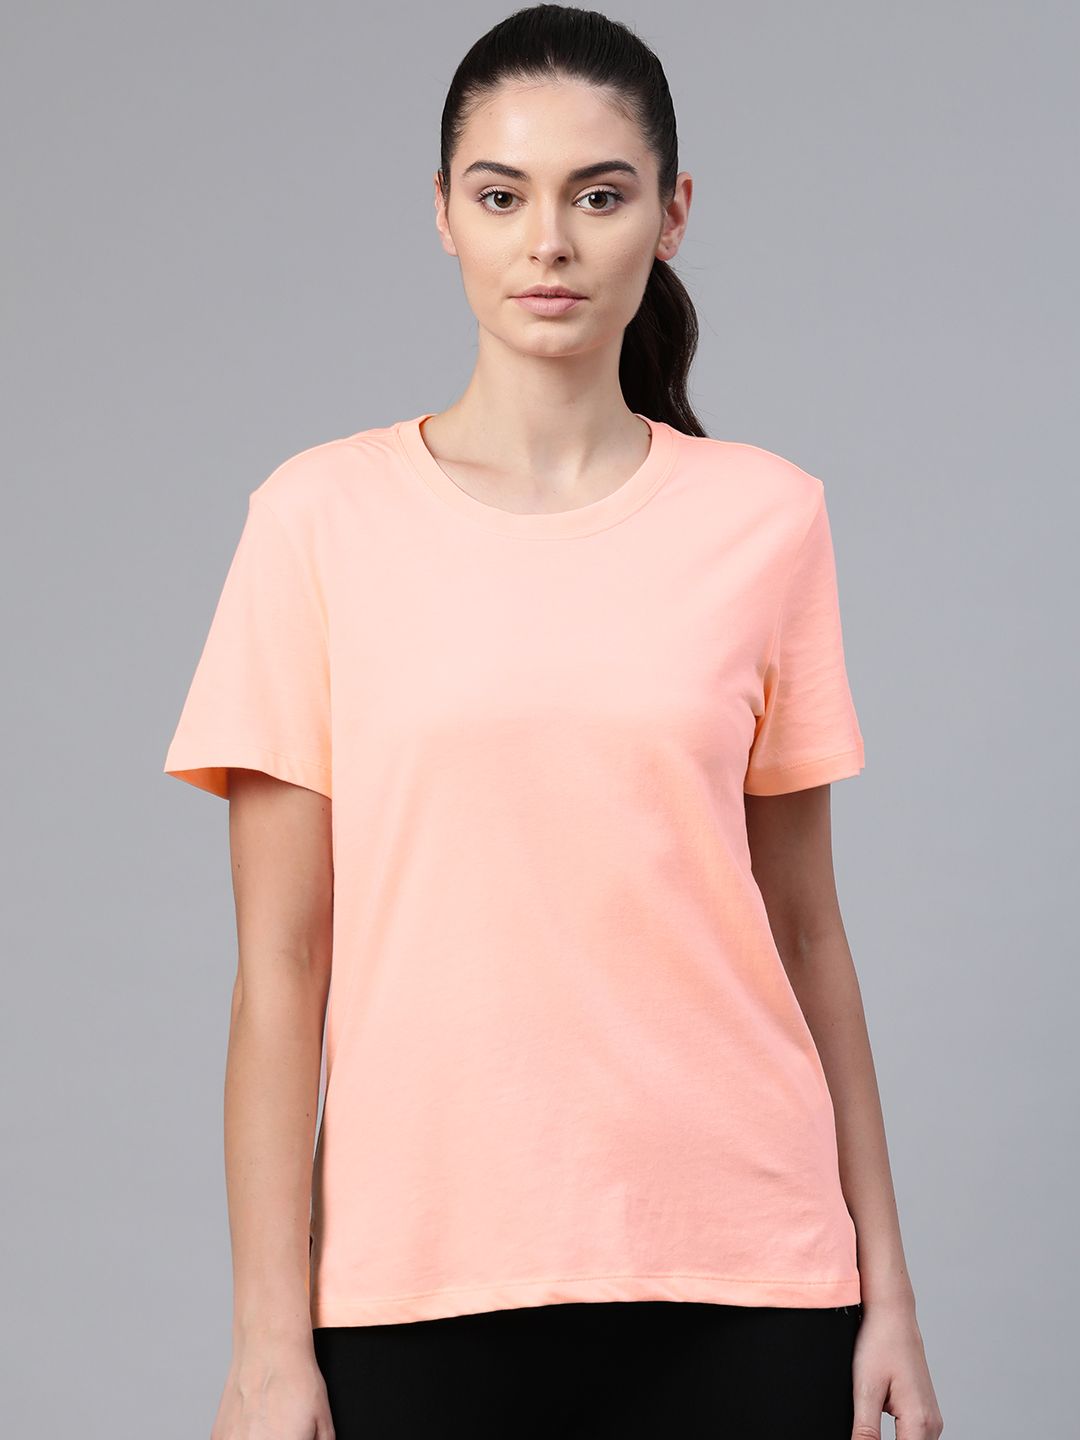 ADIDAS Women Neon Pink Solid GO-TO Training T-Shirt Price in India